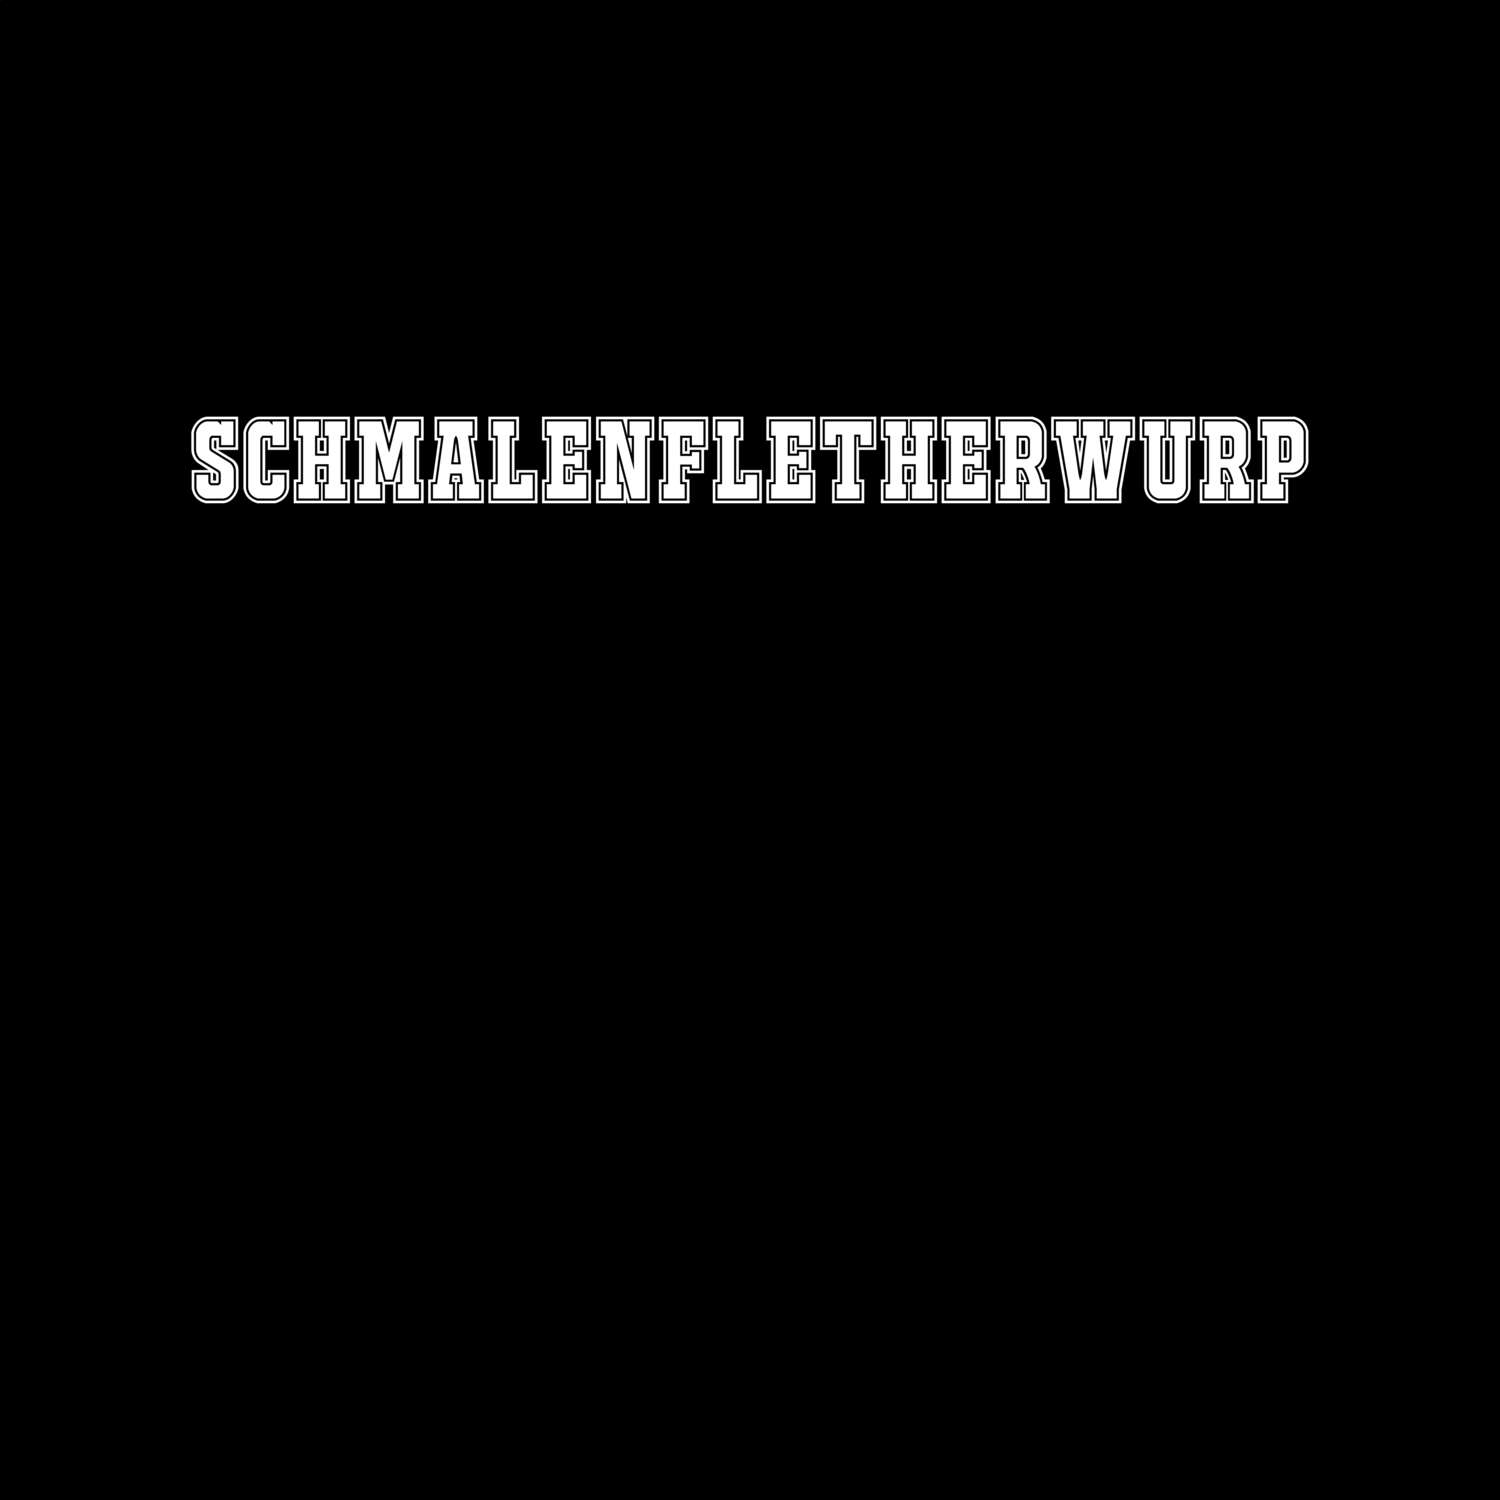 Schmalenfletherwurp T-Shirt »Classic«